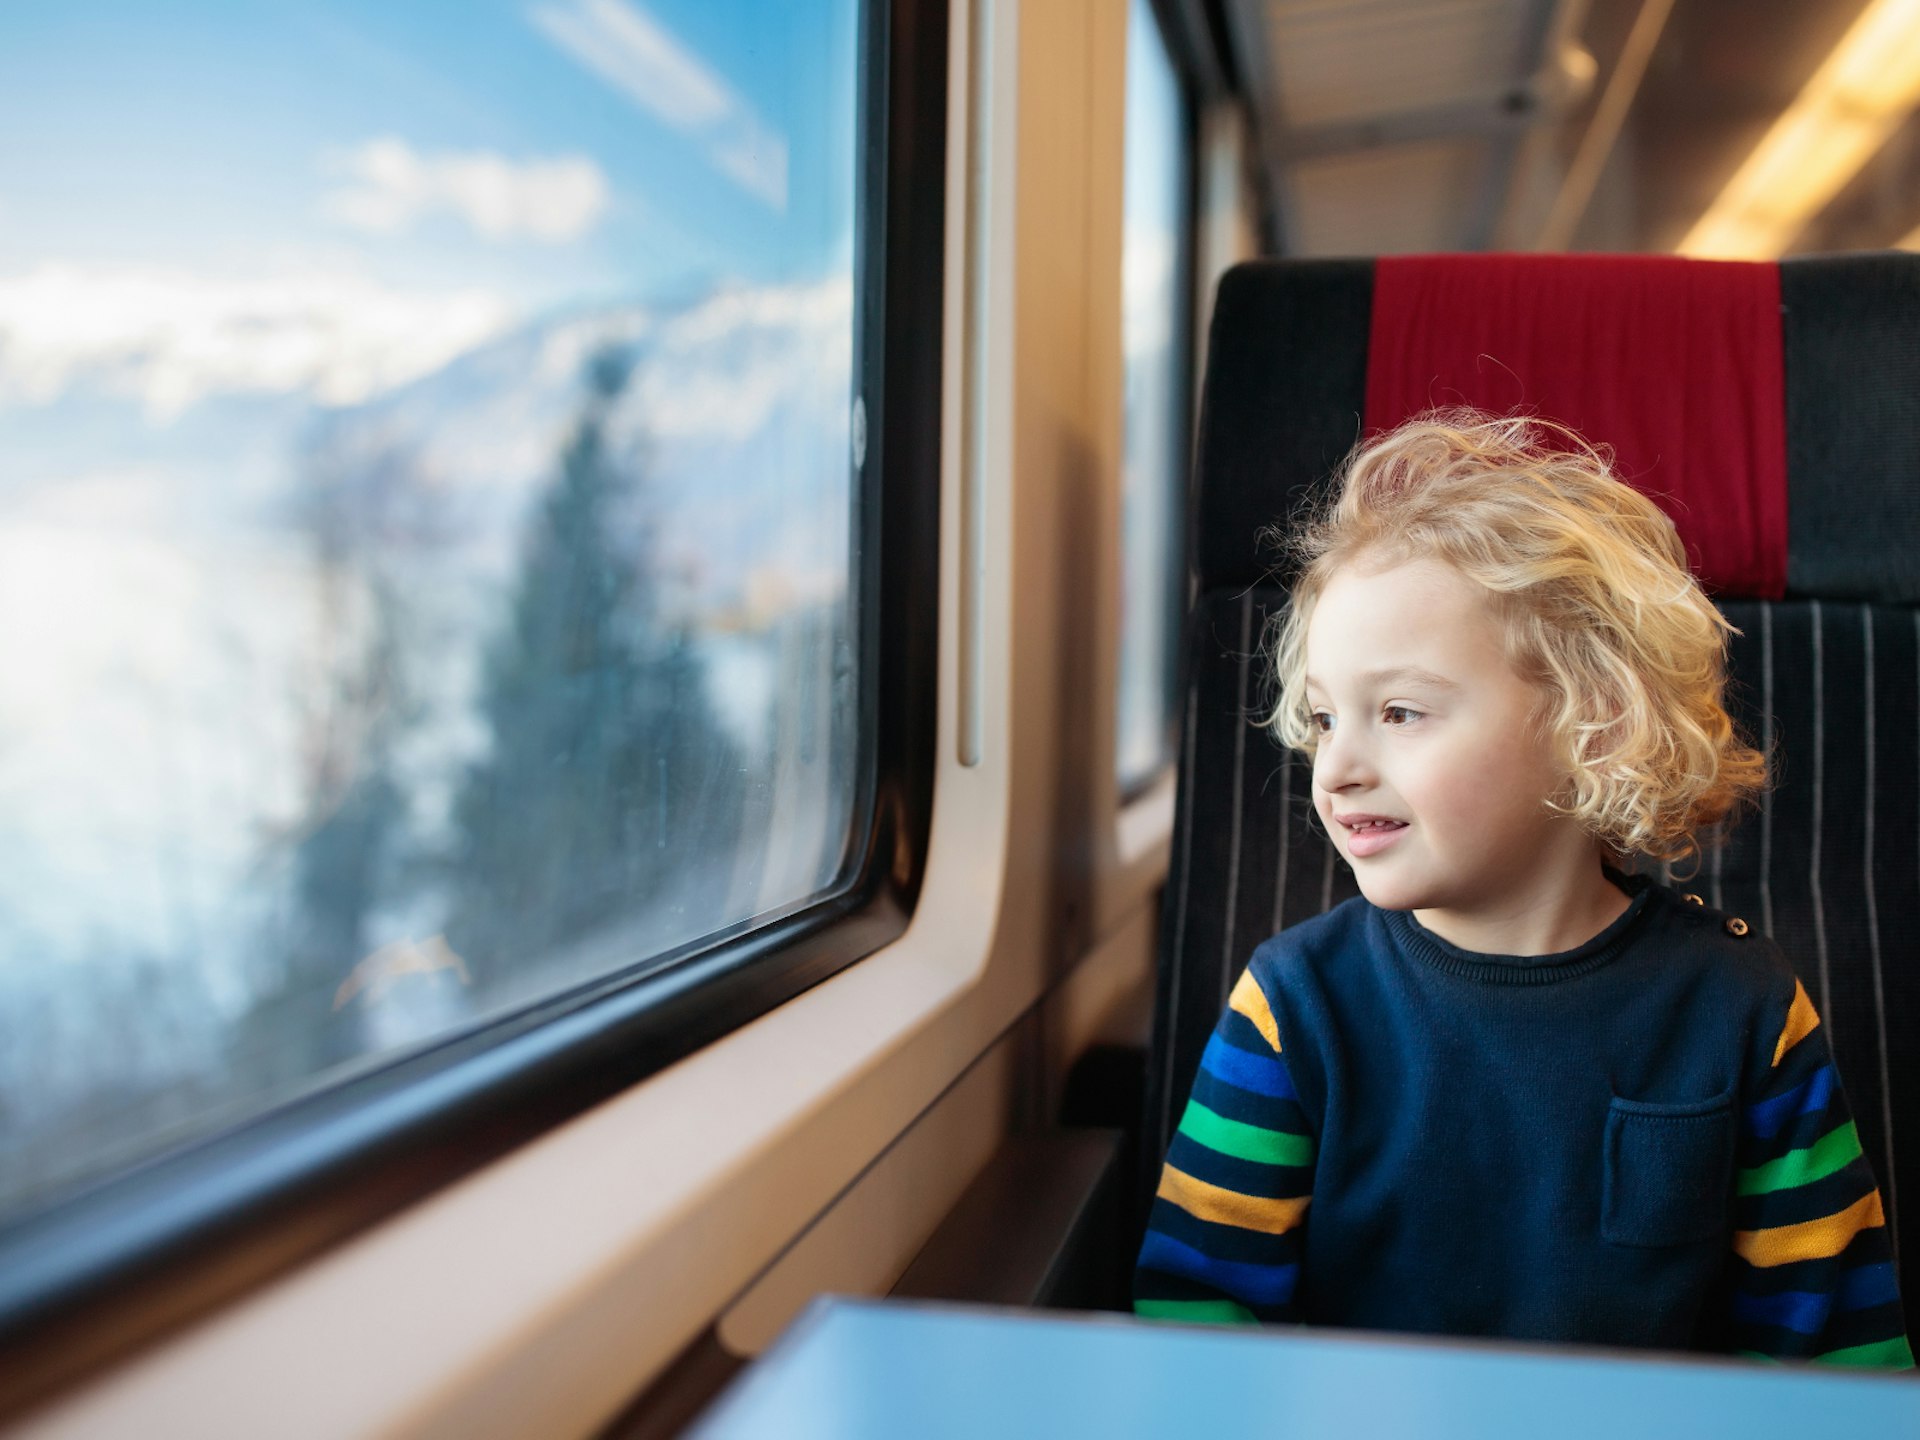 A smiling child of around five years old sits in a train seat looking out at a snowy landscape